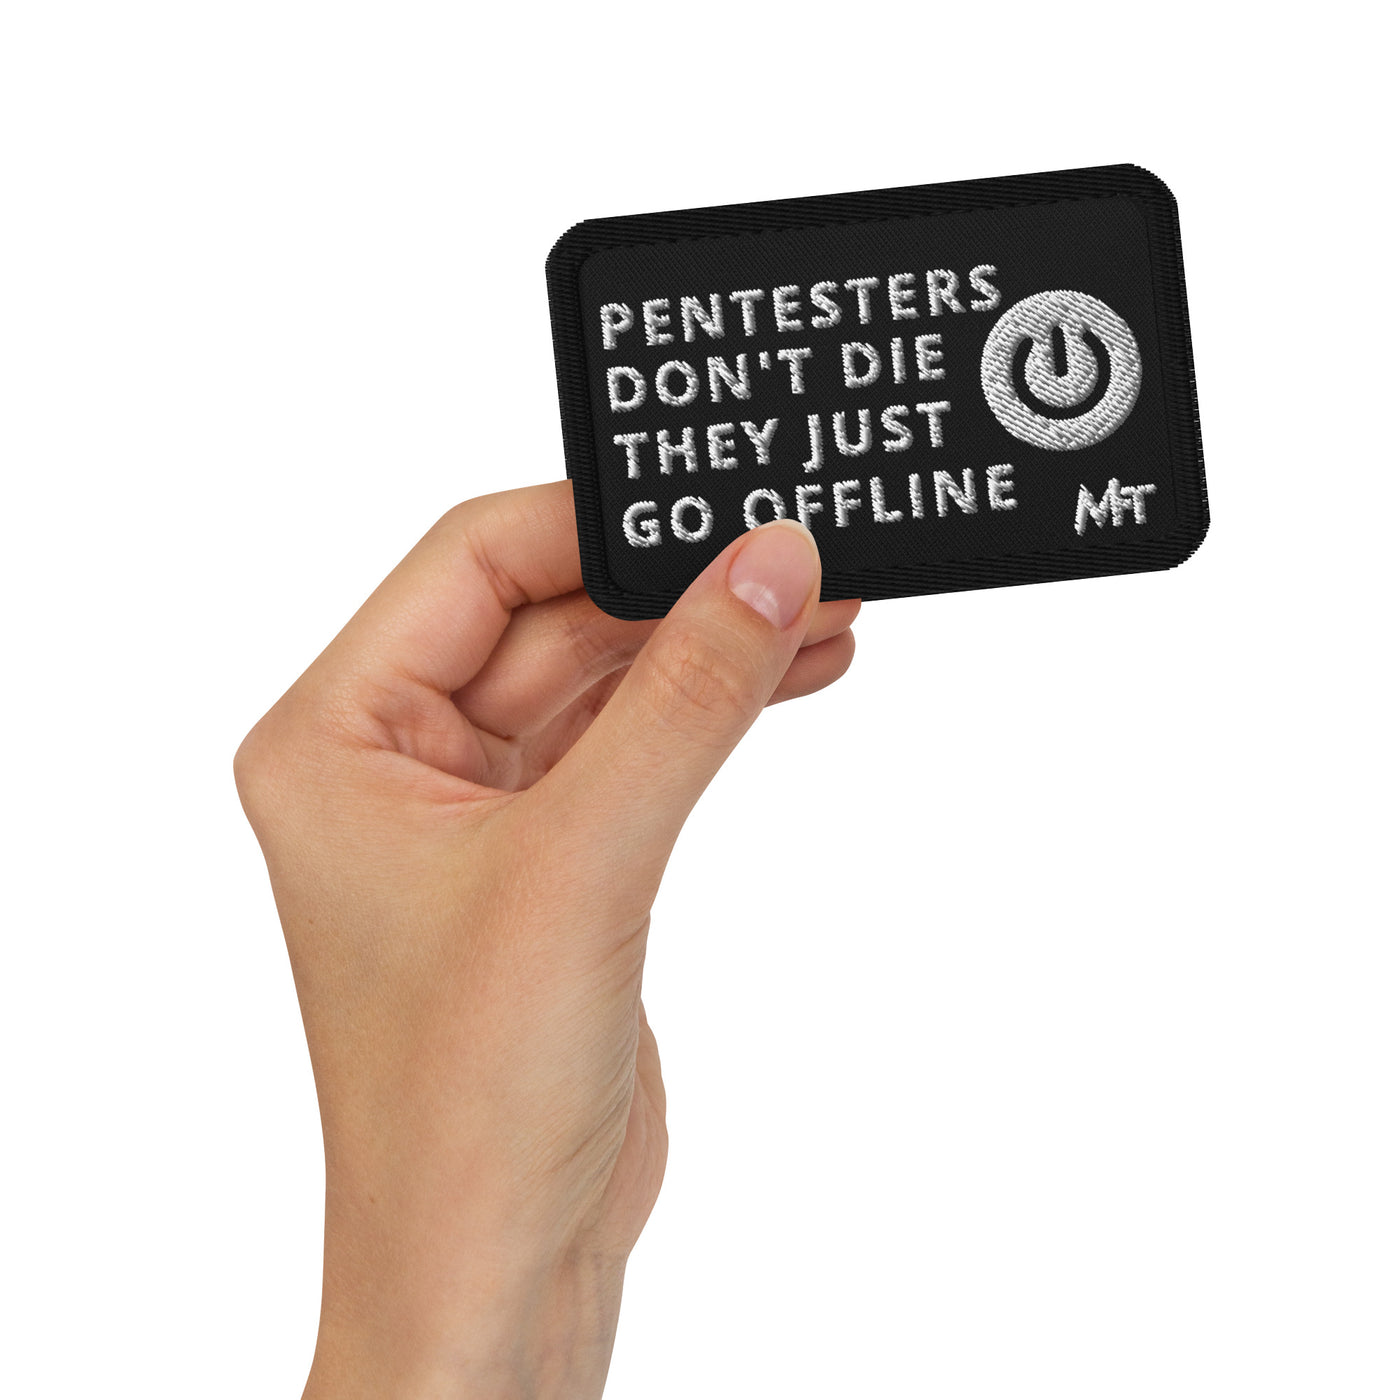 Pentesters don’t die they just go offline - Embroidered patches